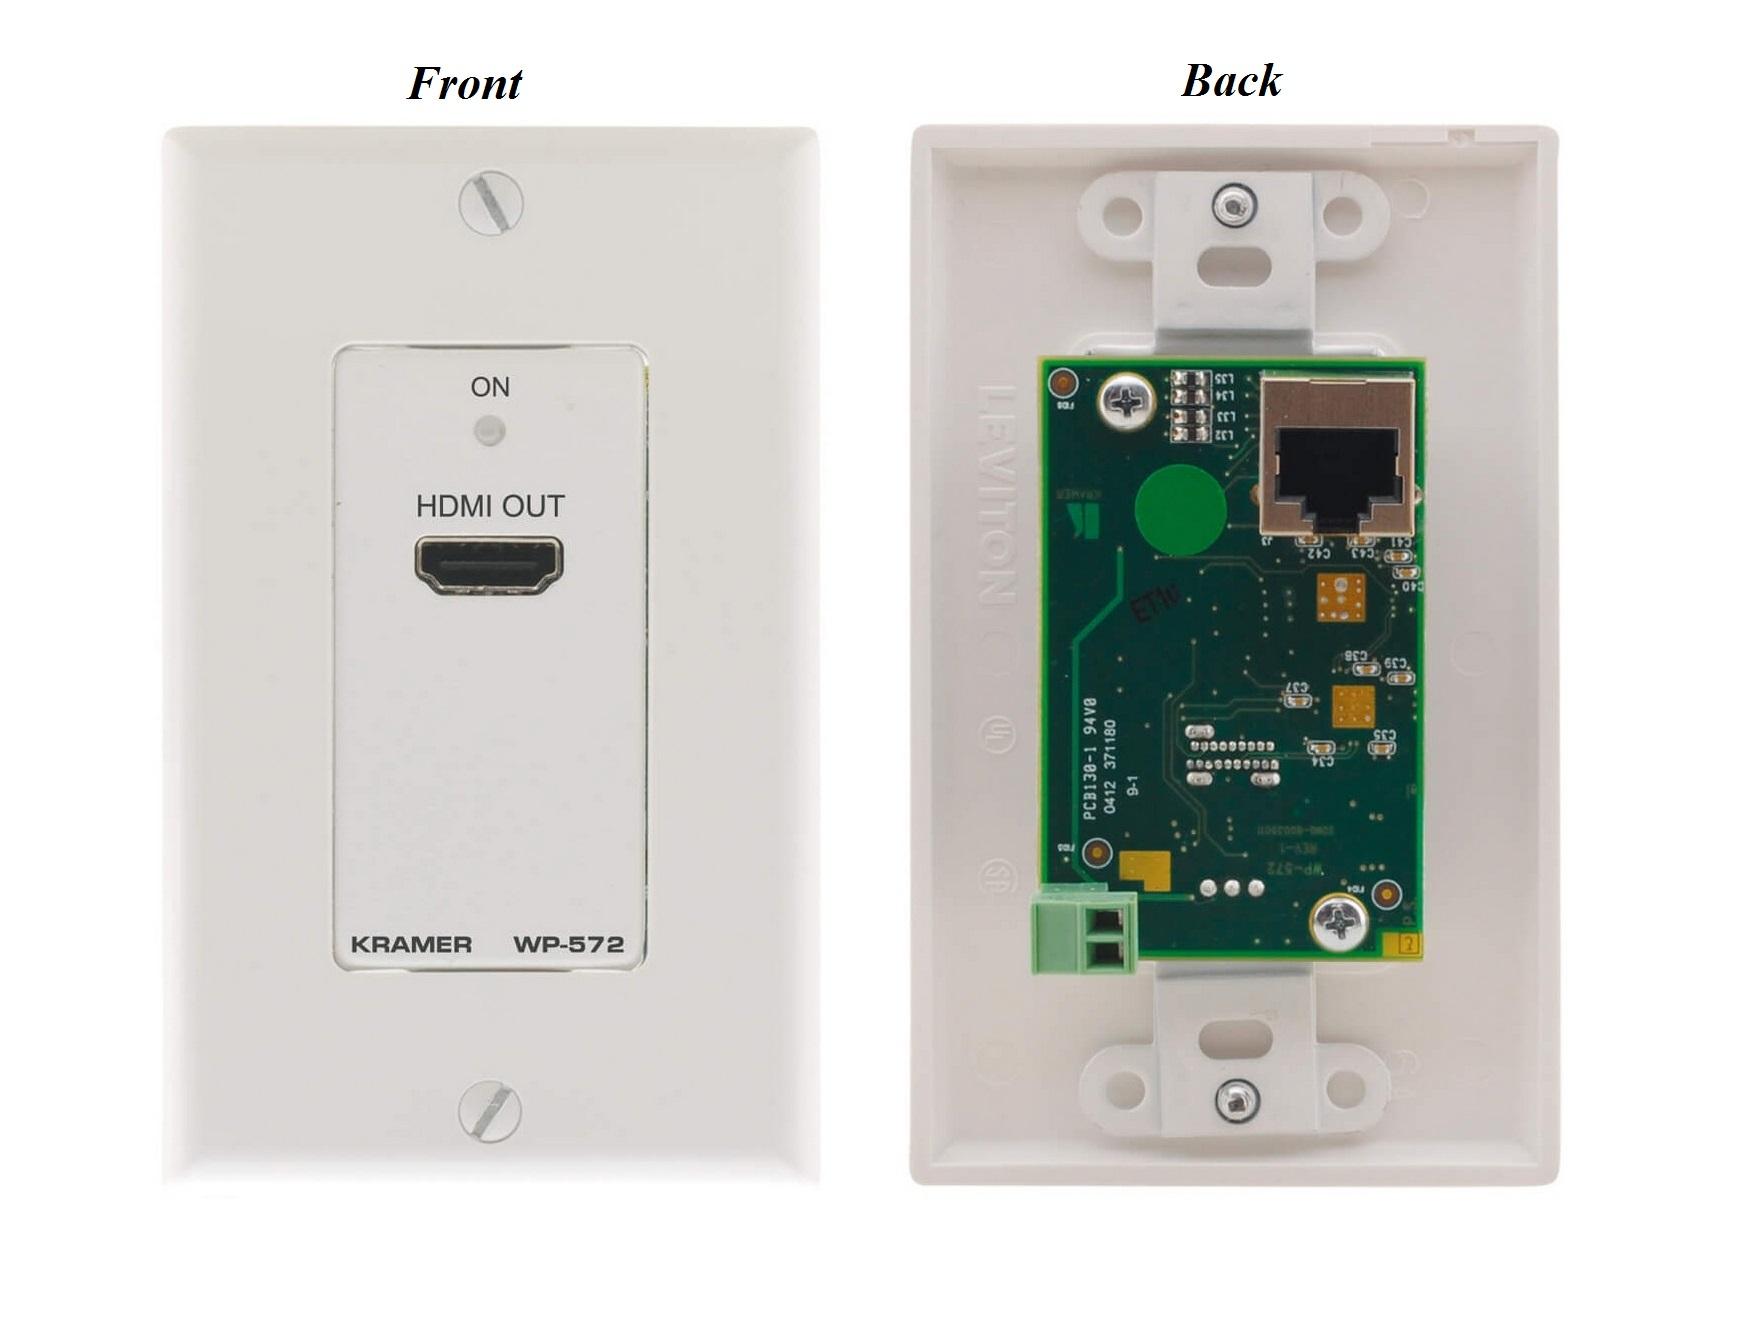 WP-572(W) Active Wall Plate HDMI over Twisted Pair Extender (Receiver)/White by Kramer